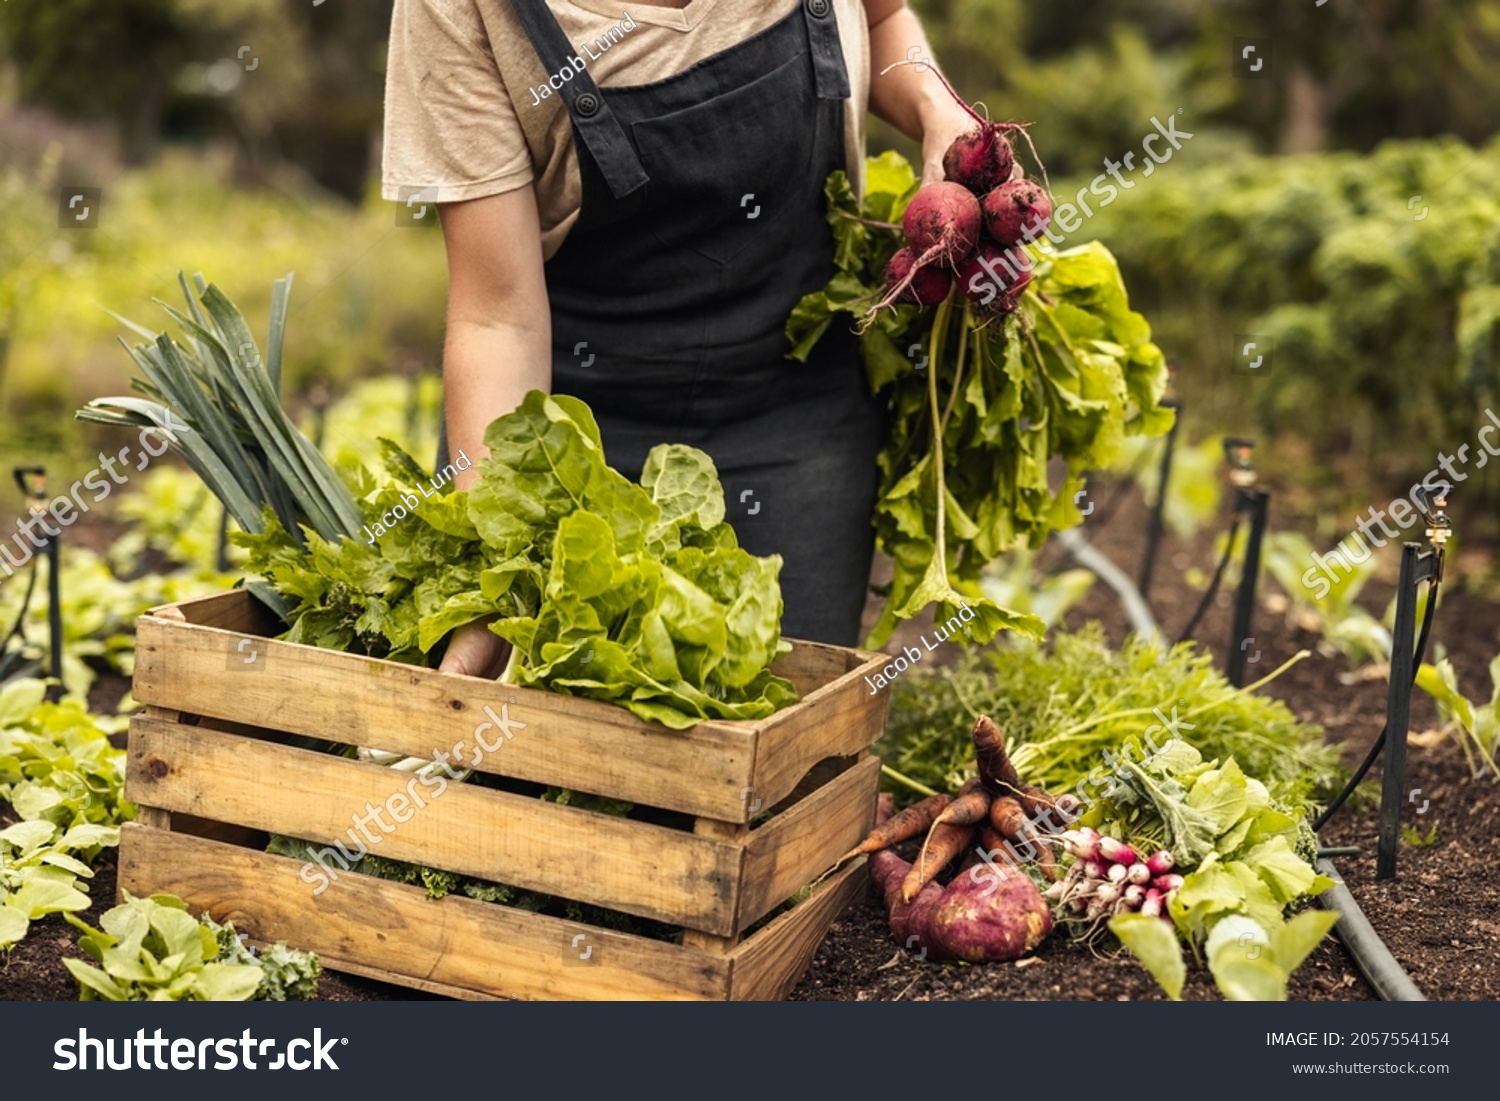 Female farmer arranging fresh vegetables into a crate on her farm. Organic farmer gathering fresh produce in her vegetable garden. Self-sustainable young woman harvesting in an agricultural field. #2057554154